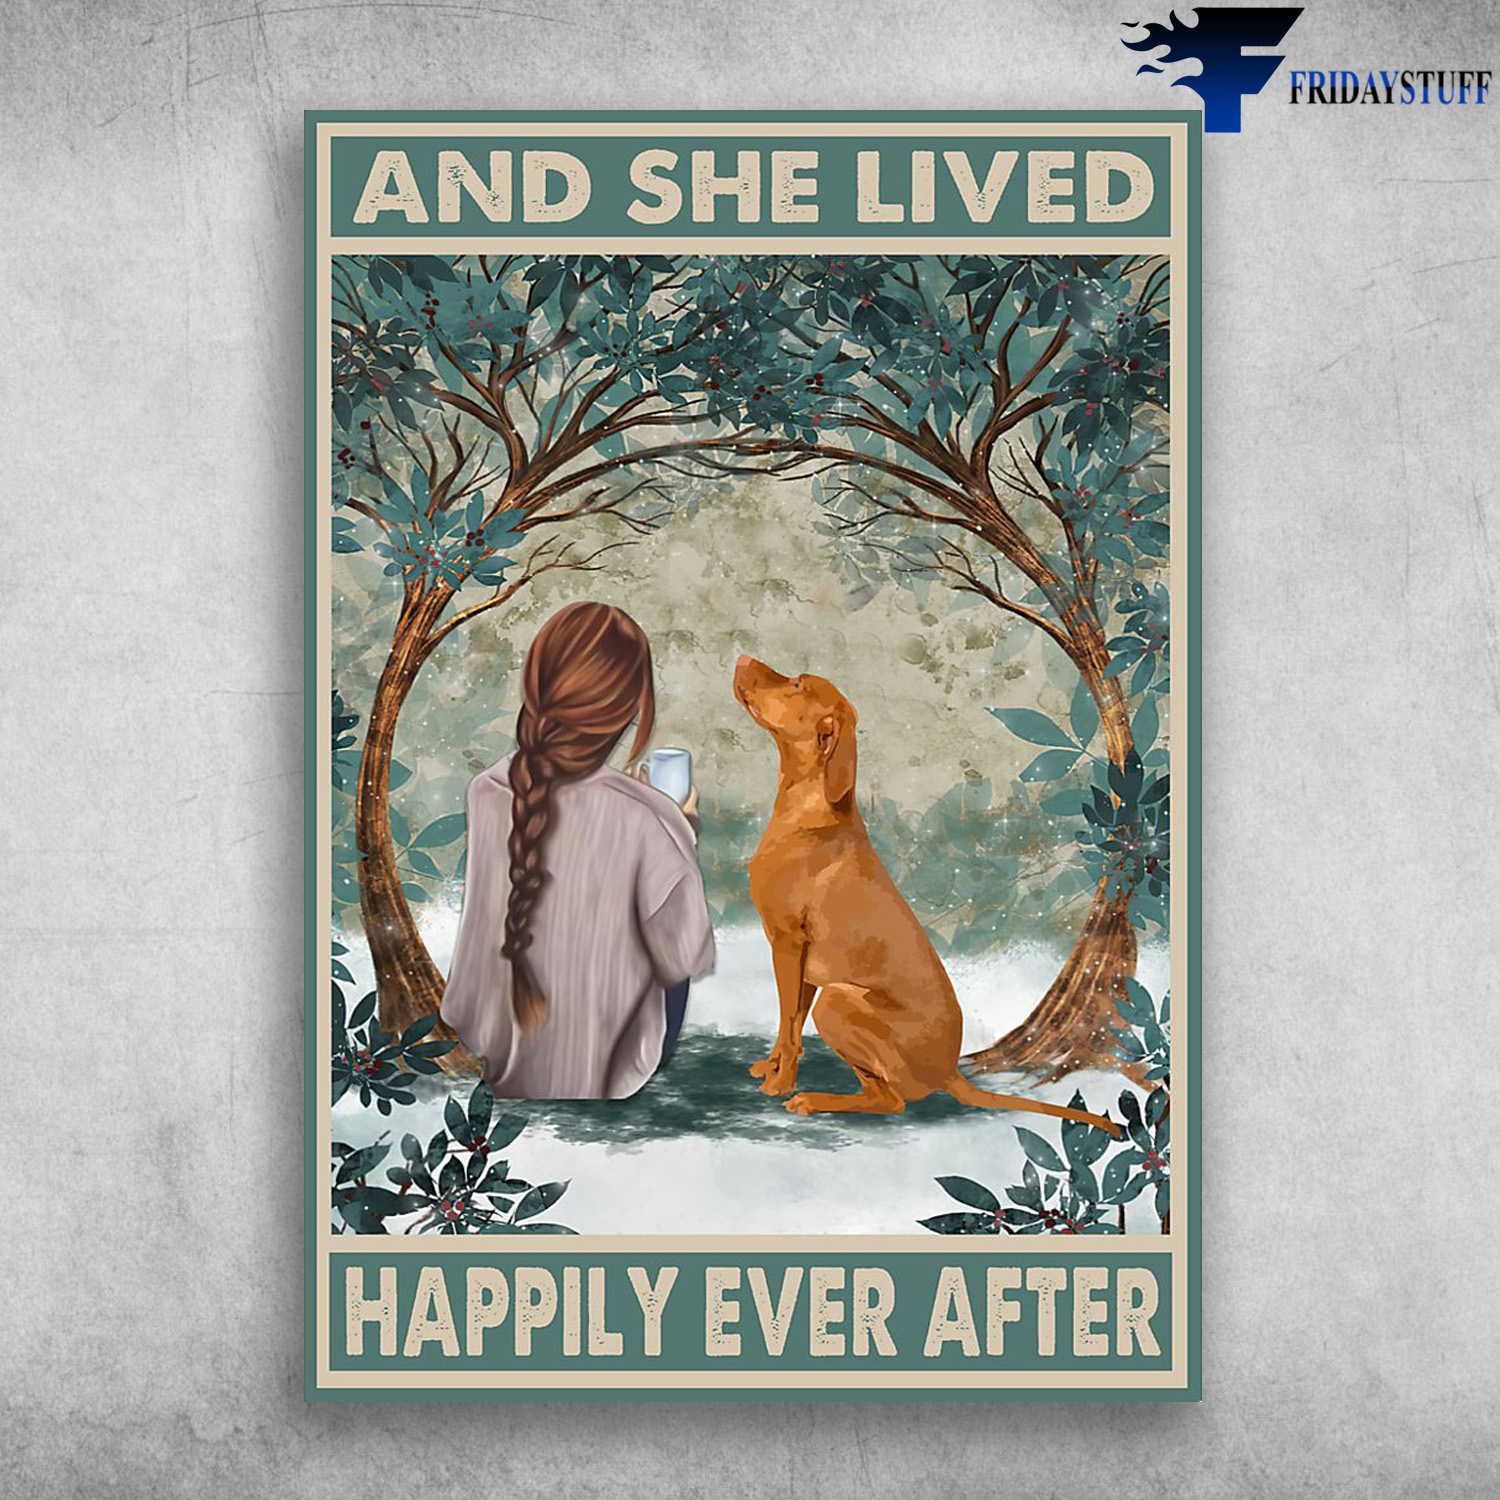 Girl And Vizslas Dog - And She Live, Happily Ever After